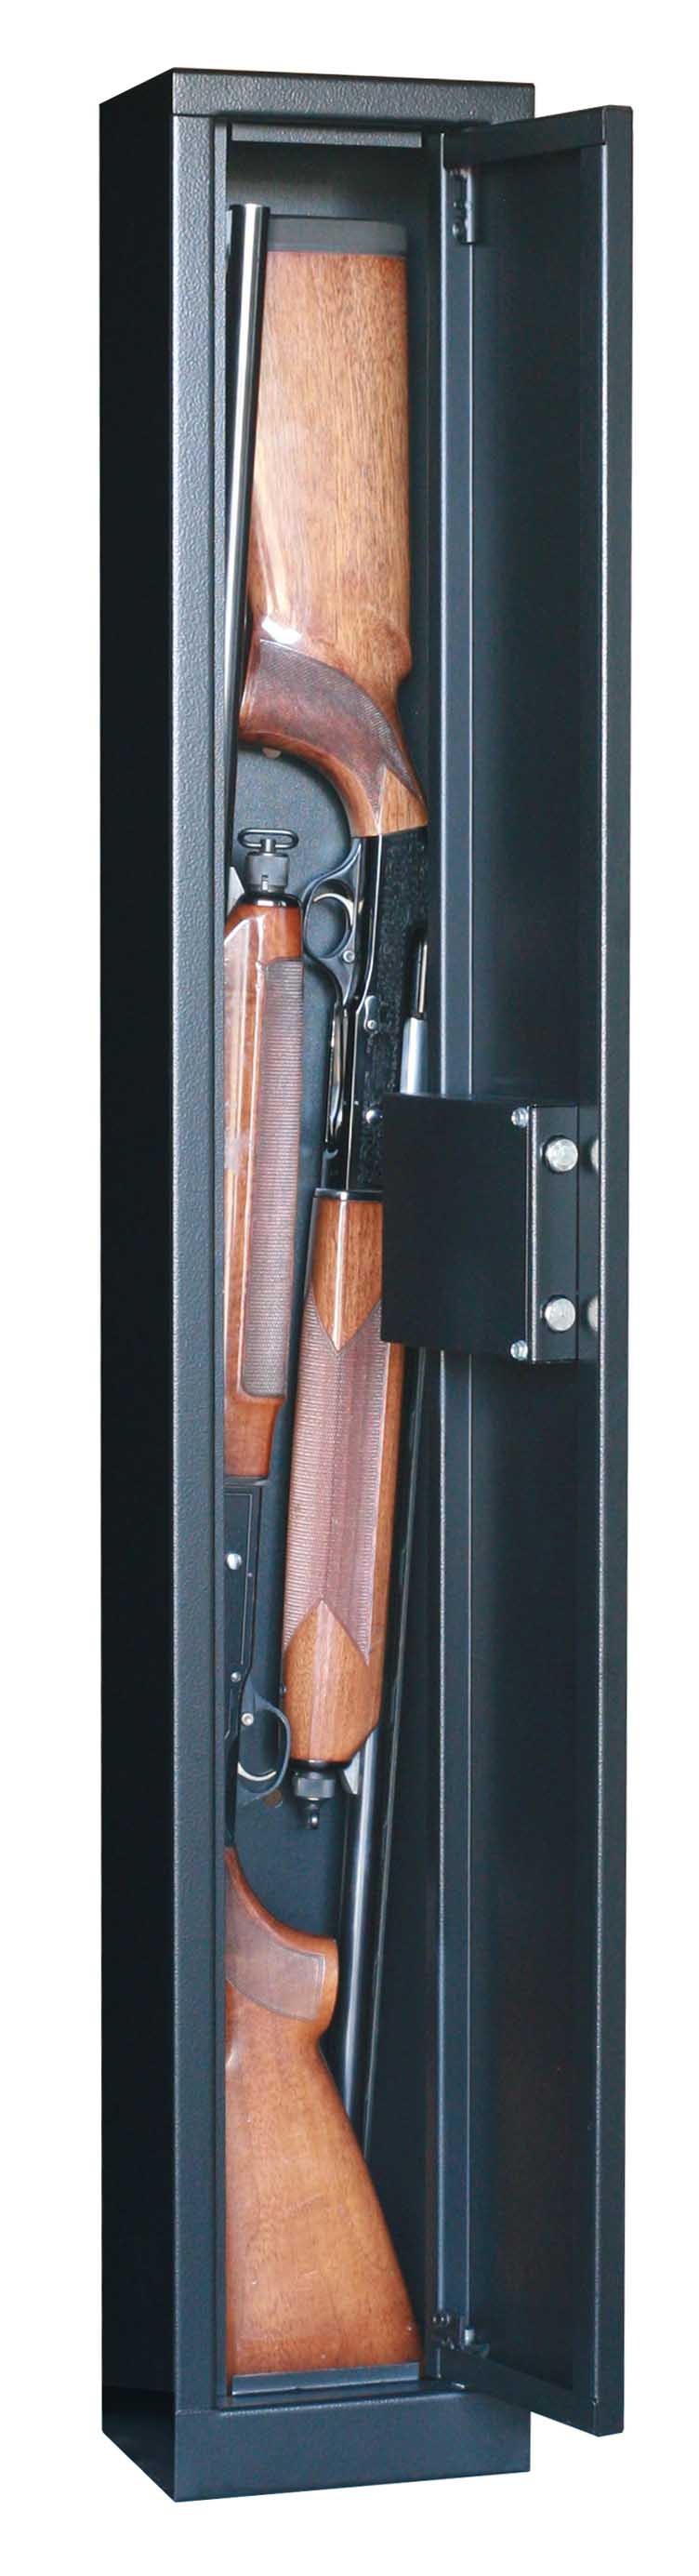 Armoire forte Fortify Steï Safe 2 armes, MADE IN CHASSE - Equipements de chasse